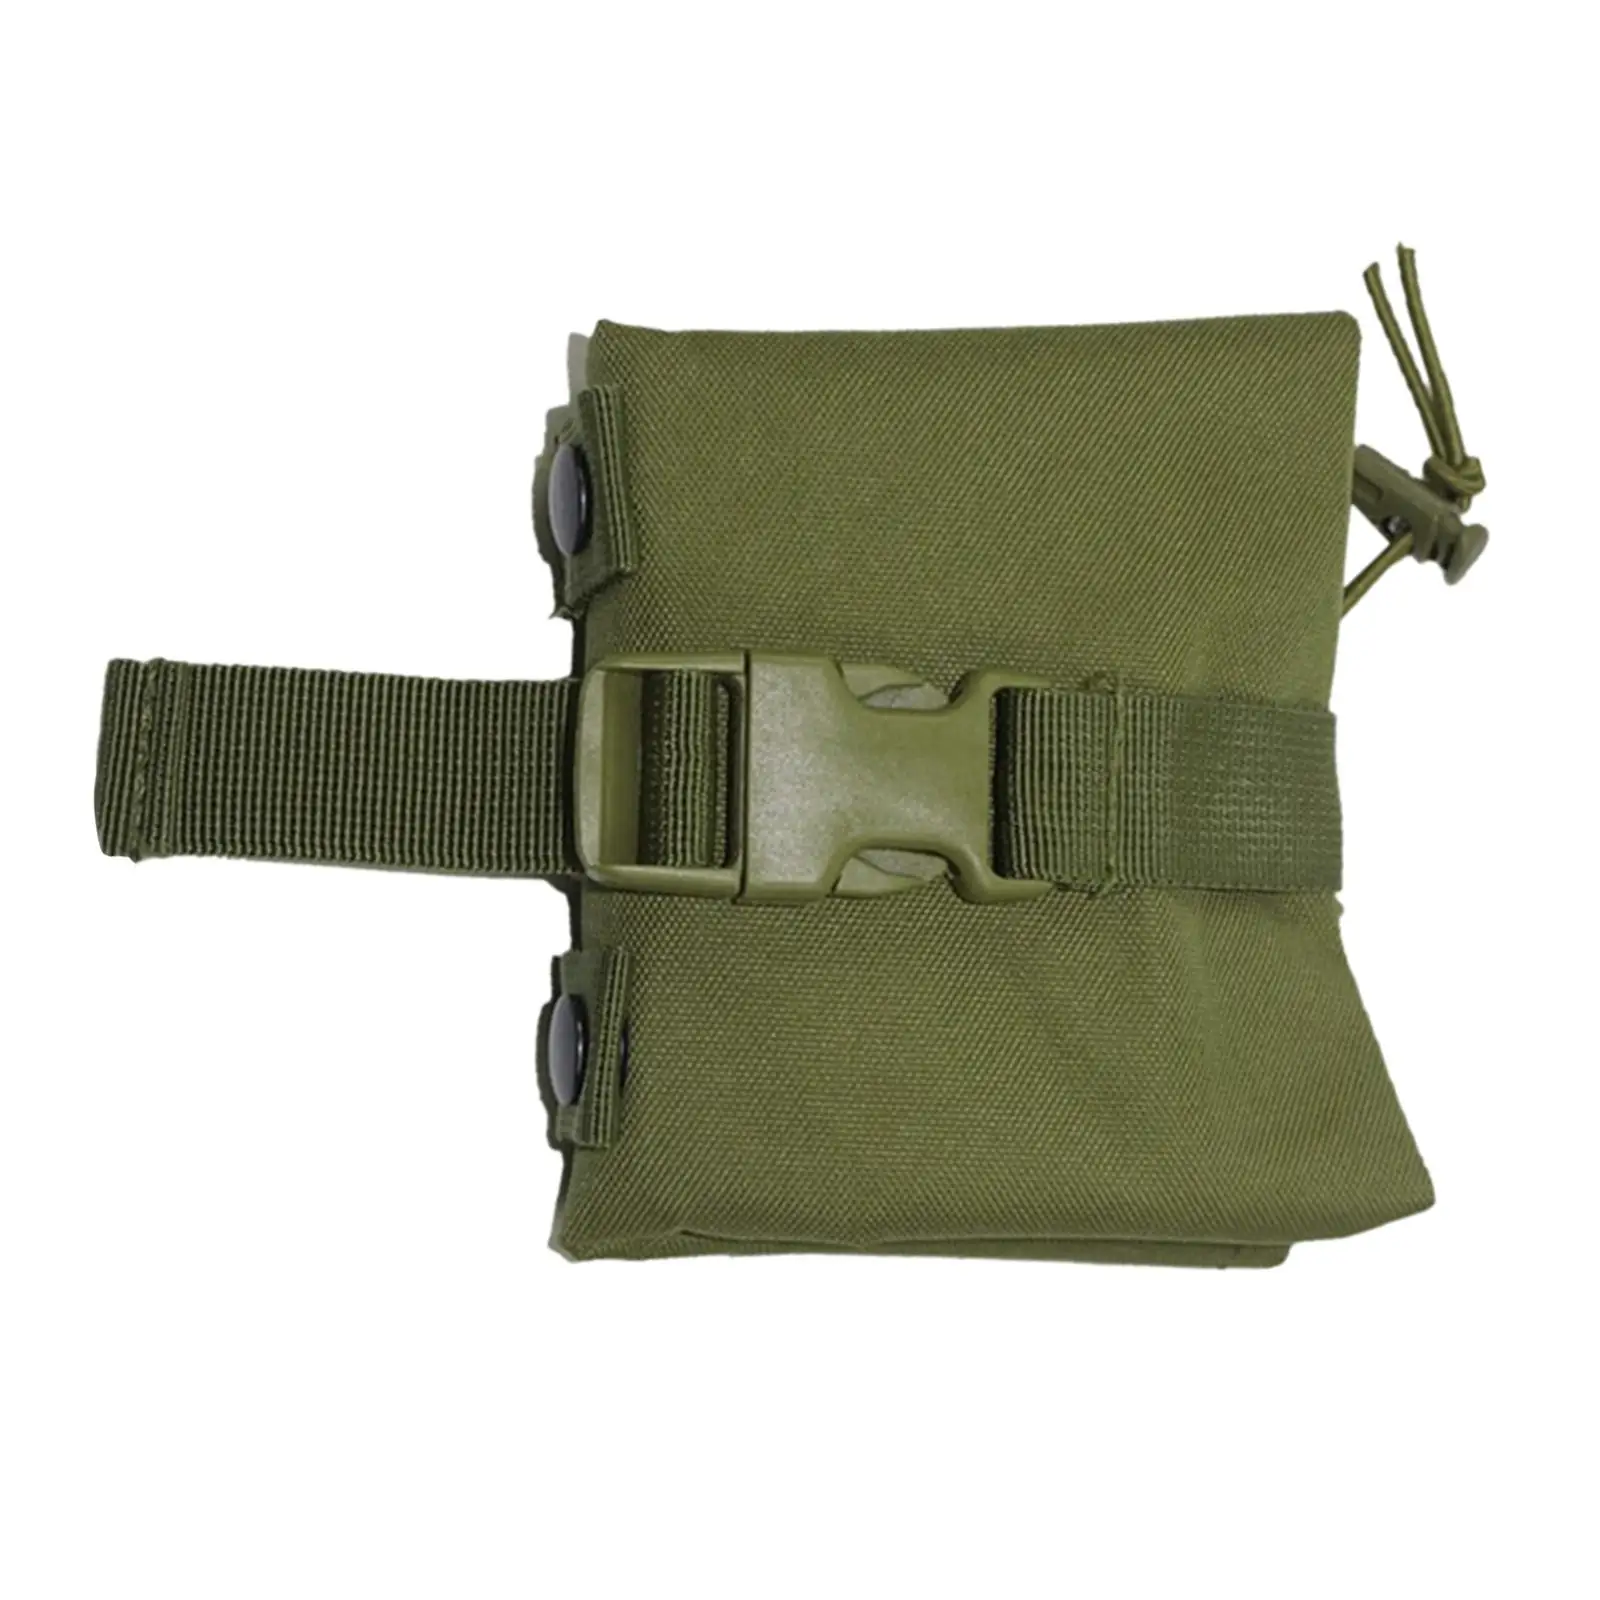 Outside Pouch Collapsible Durable Waist Packs for Outdoor Activities